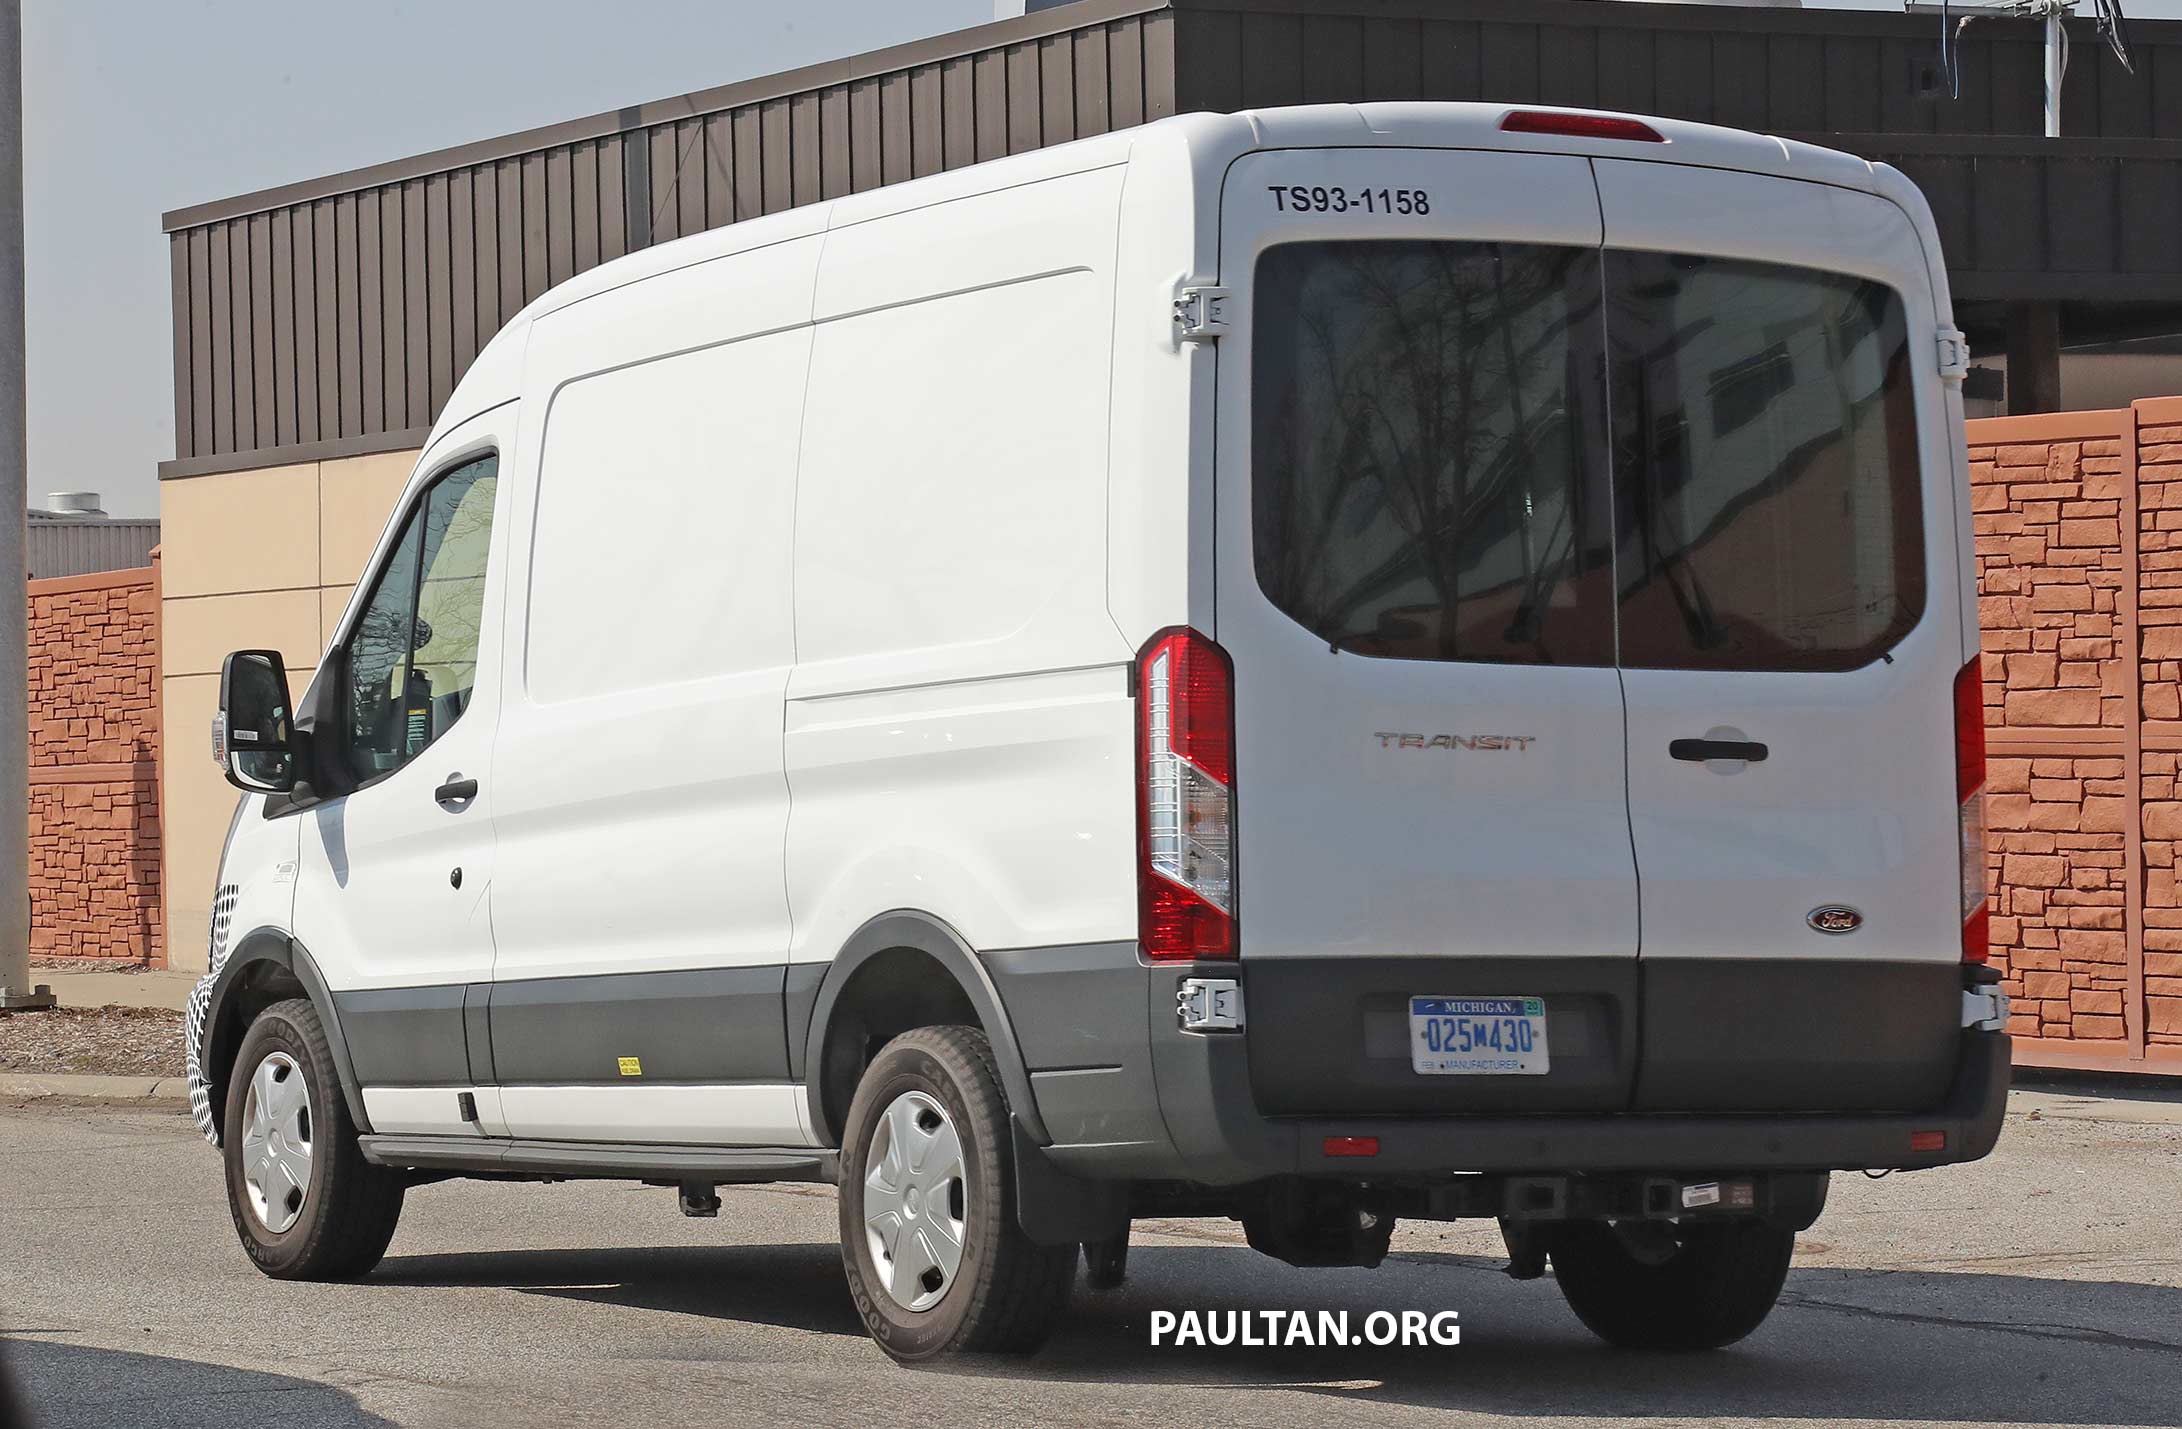 Форд транзит 2019г. Ford Transit 2019. Ford Transit 5. Ford Transit 2019 фургон. Форд Транзит 2019 года.